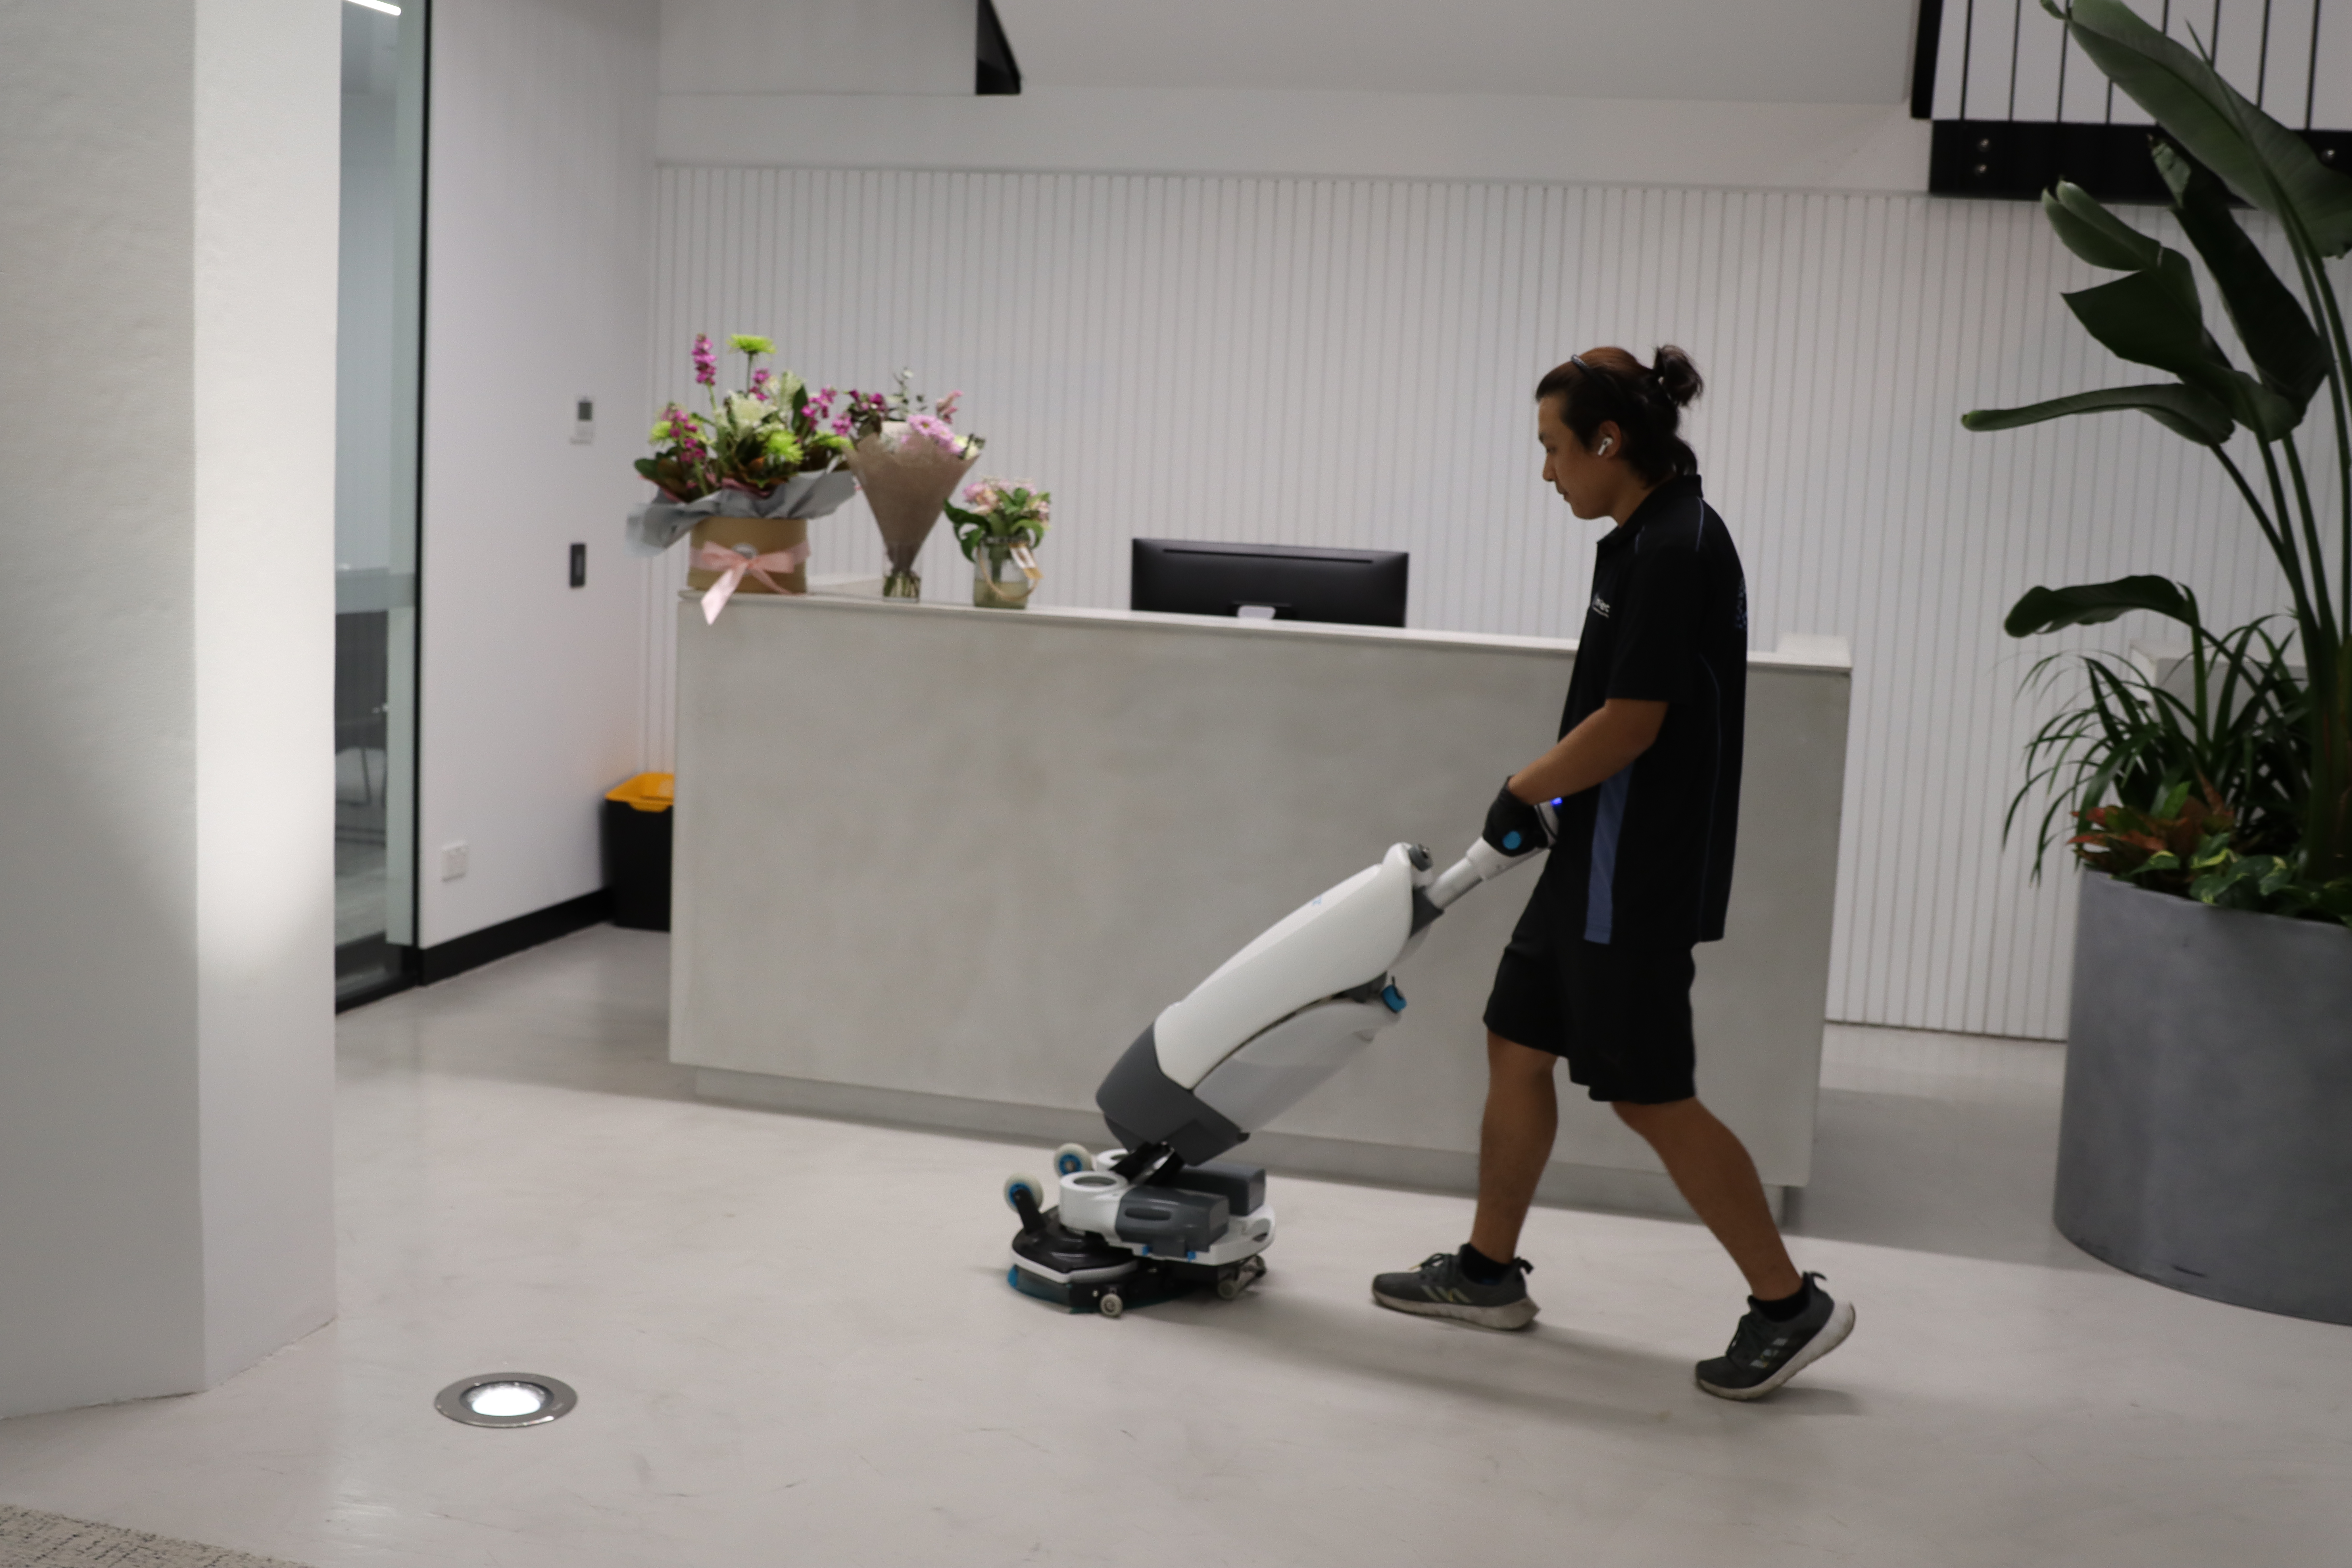 Common Area Cleaning – Tasks and Processes Involved